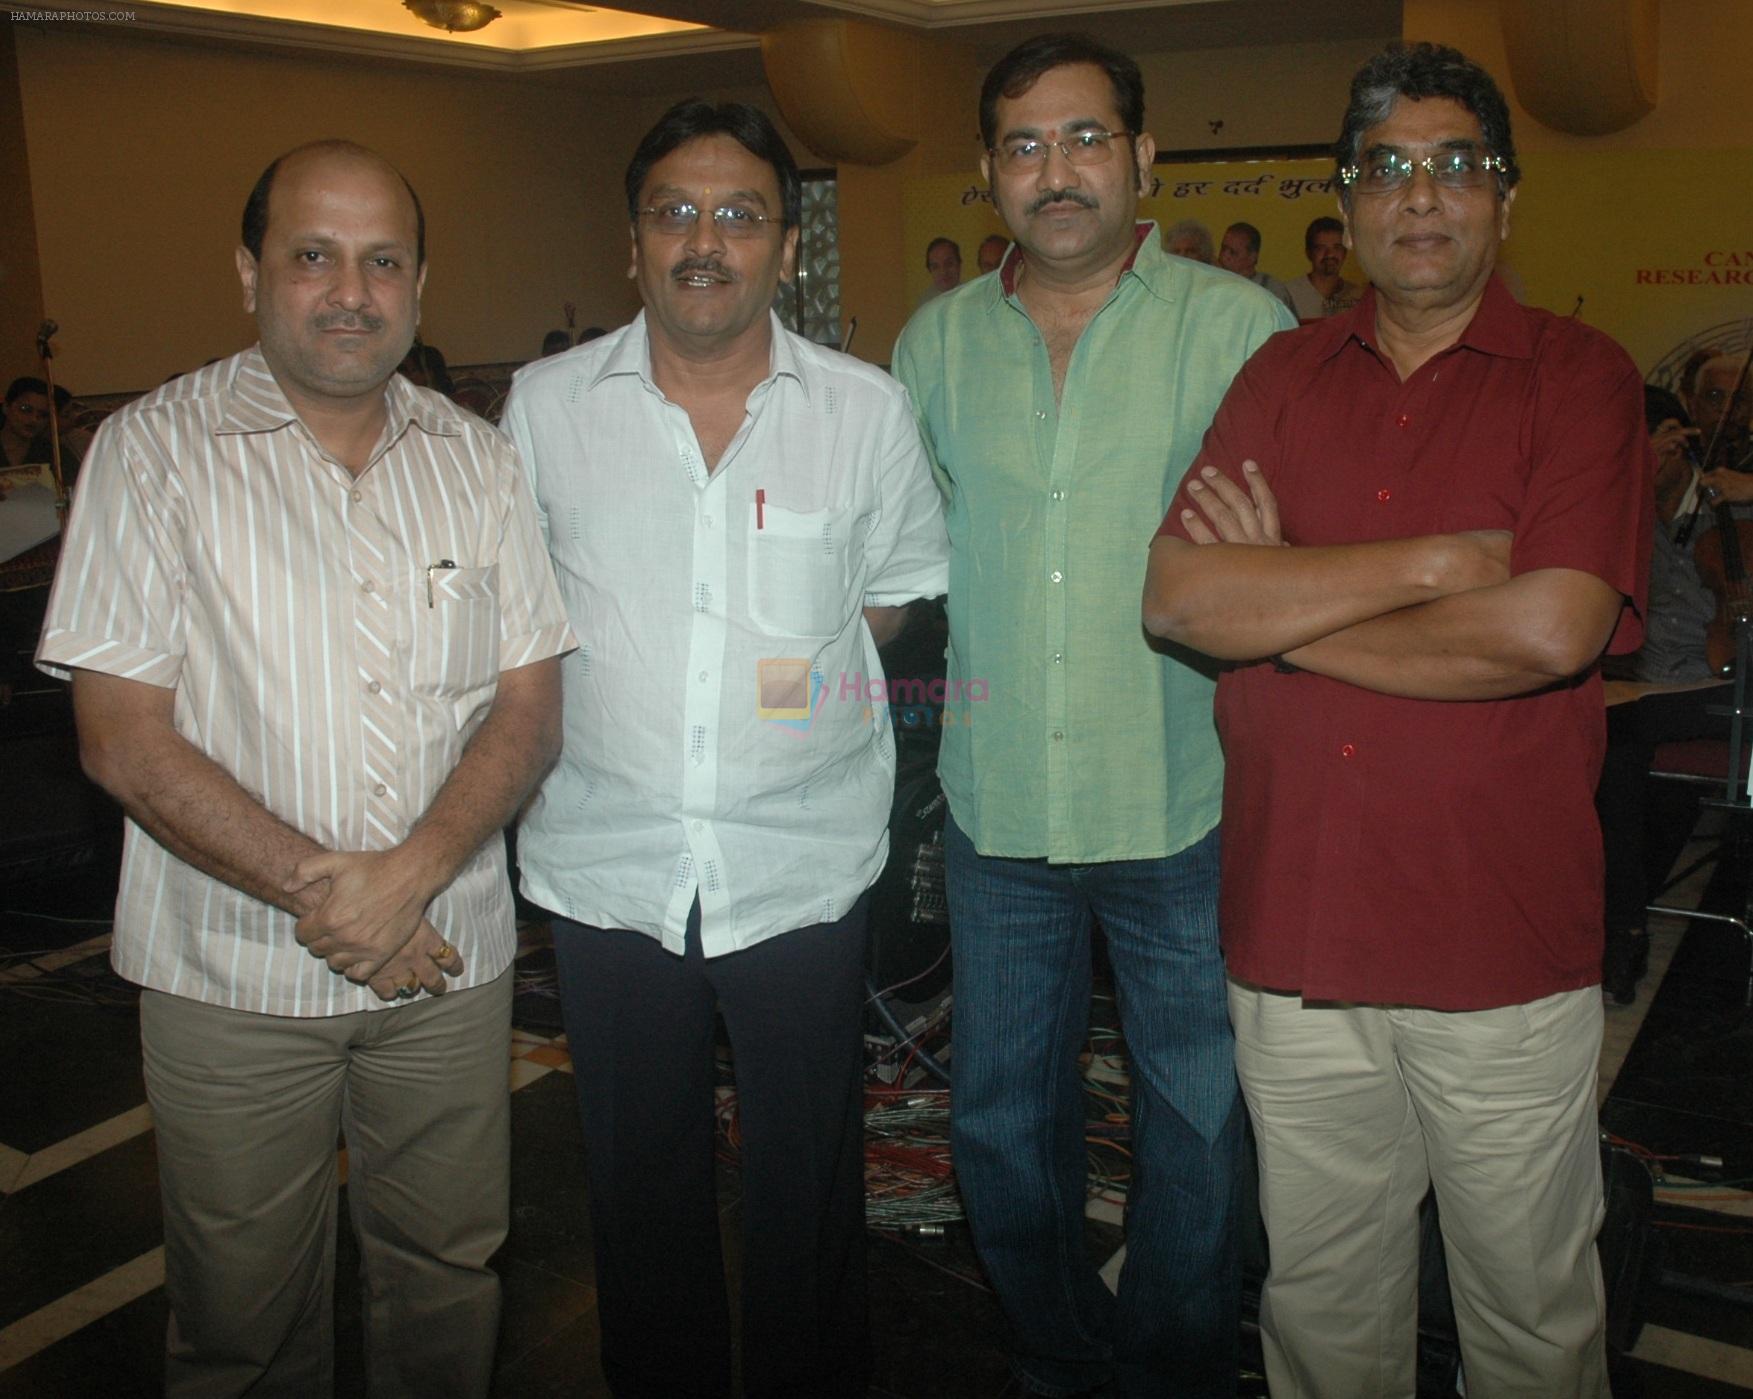 Anil Garg,Jayanti Ghosherand Sudesh Bhosle with Kishore Sharma at the rehearsals for the Cancer Aid & Research Foundation's Music Heals 2011 with 100 live musicians under the Music Batonship of Jayanti Gosher & Kisho